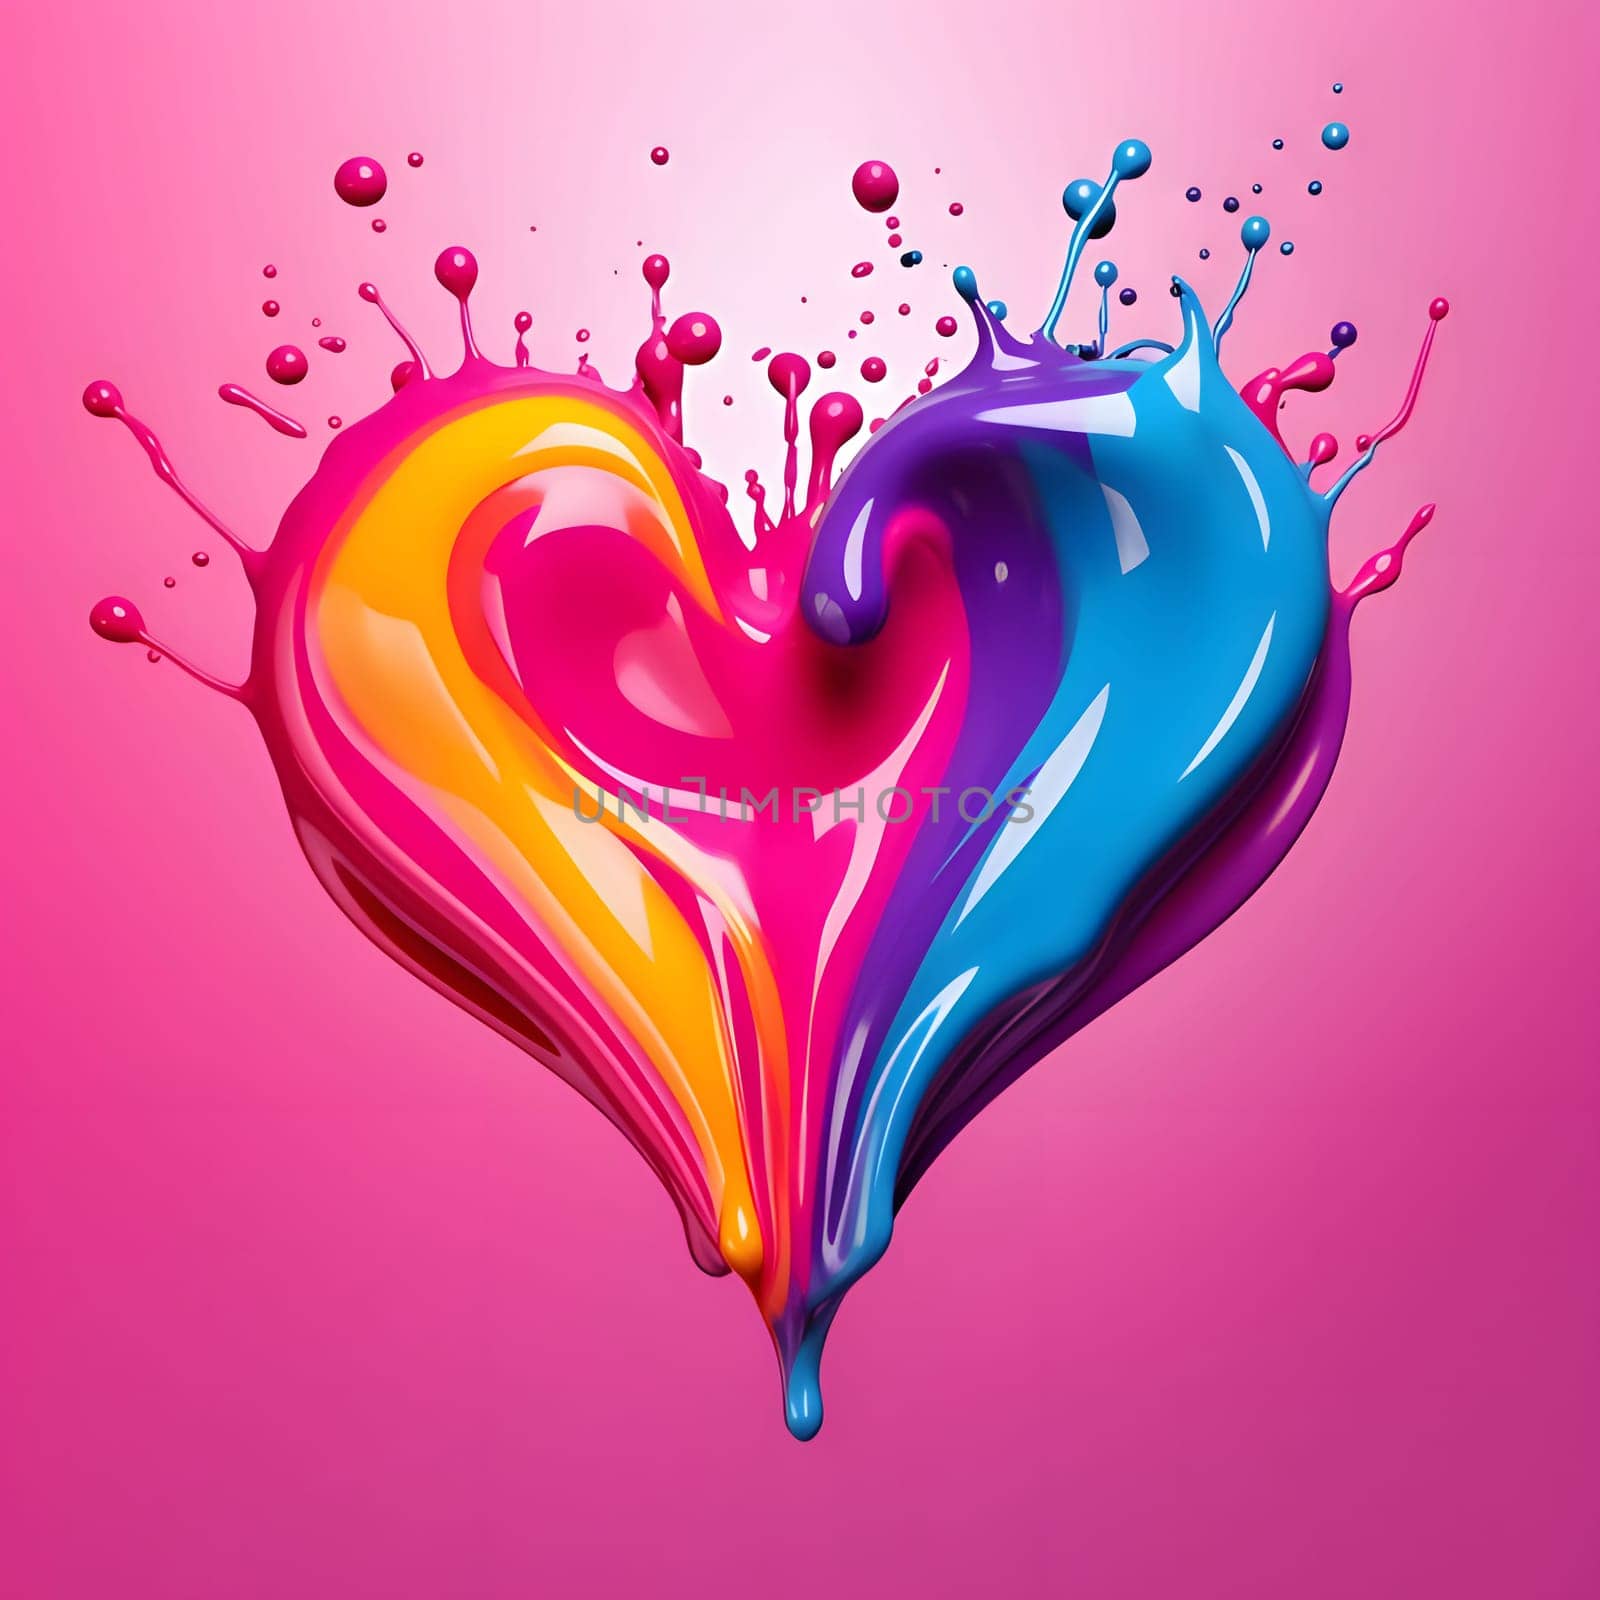 Colorful rainbow heart made of colored watercolor paint, an abstract composition on a pink background. Heart as a symbol of affection and love. The time of falling in love and love.